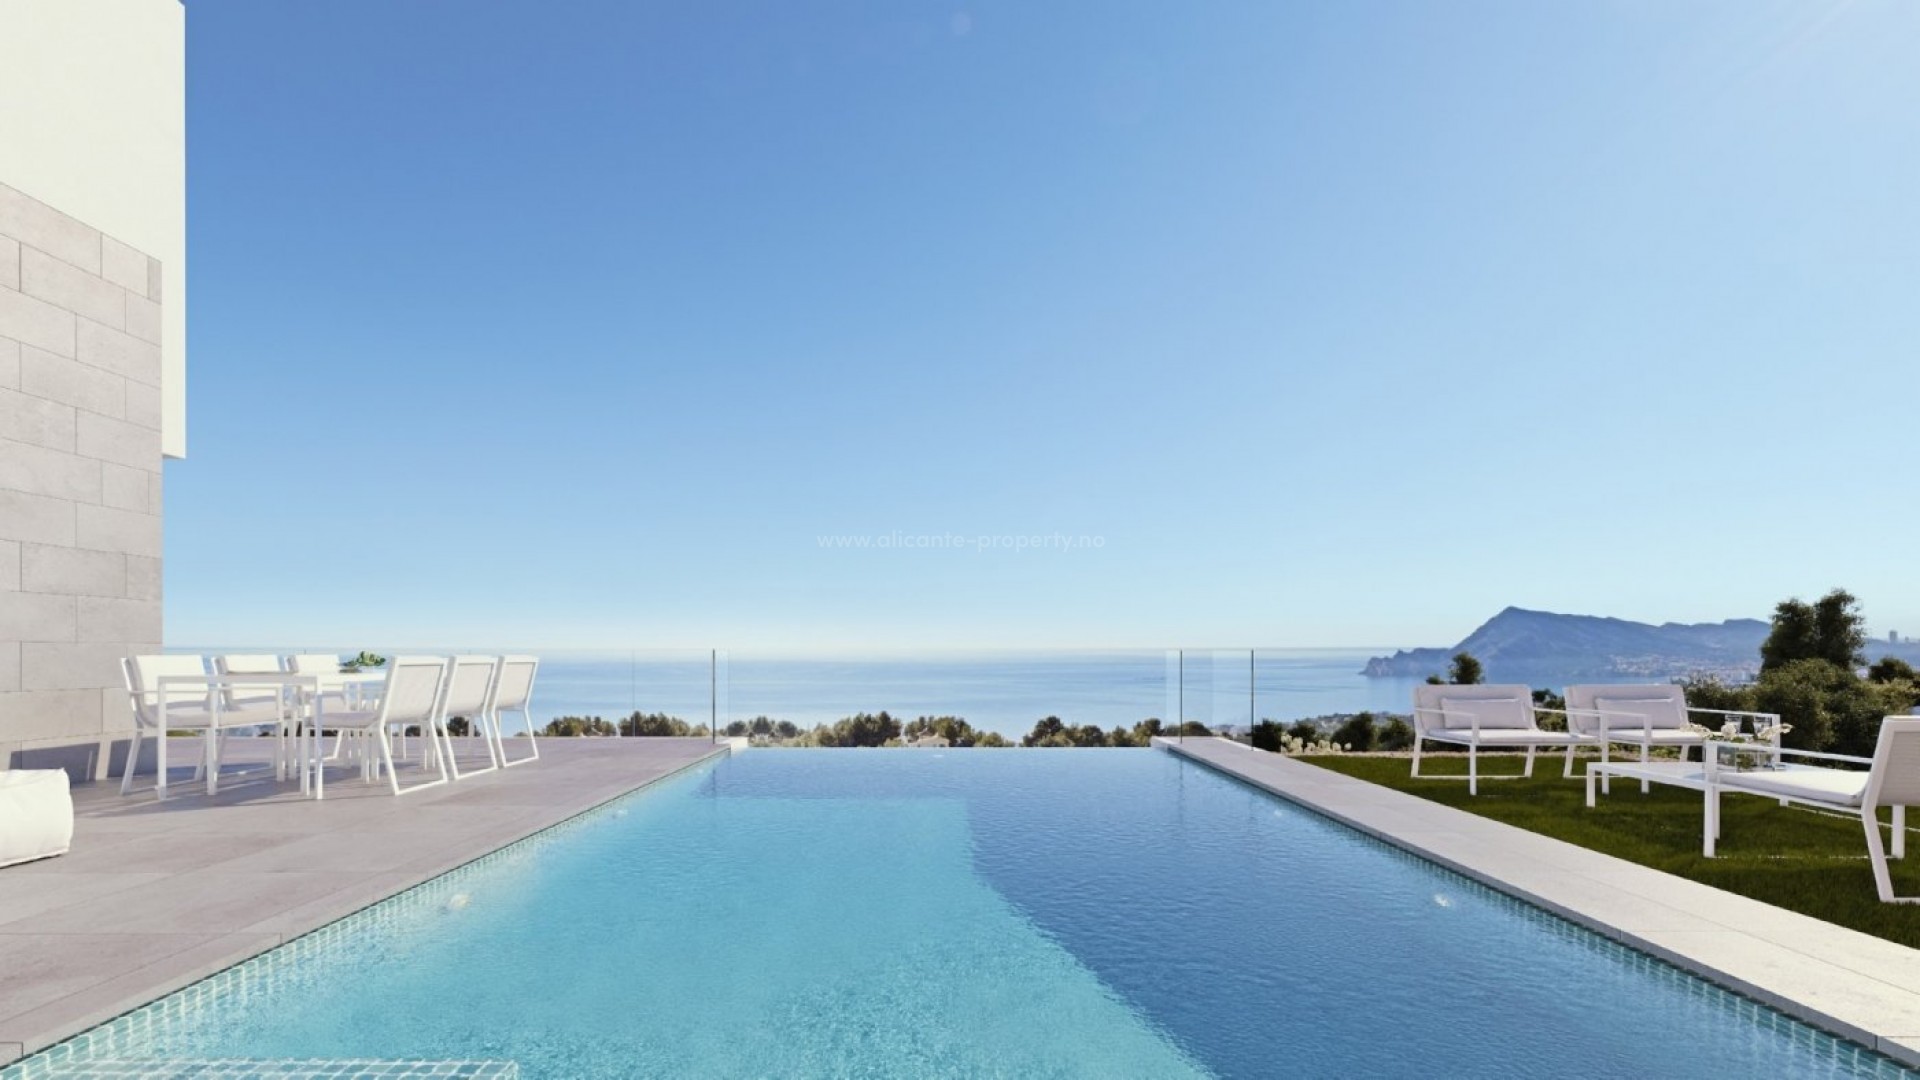 Luxury villa in Altea, 360° views of the sea and Benidorm, 4 bedrooms, 6 bathrooms, large terrace with swimming pool, the villa is automated